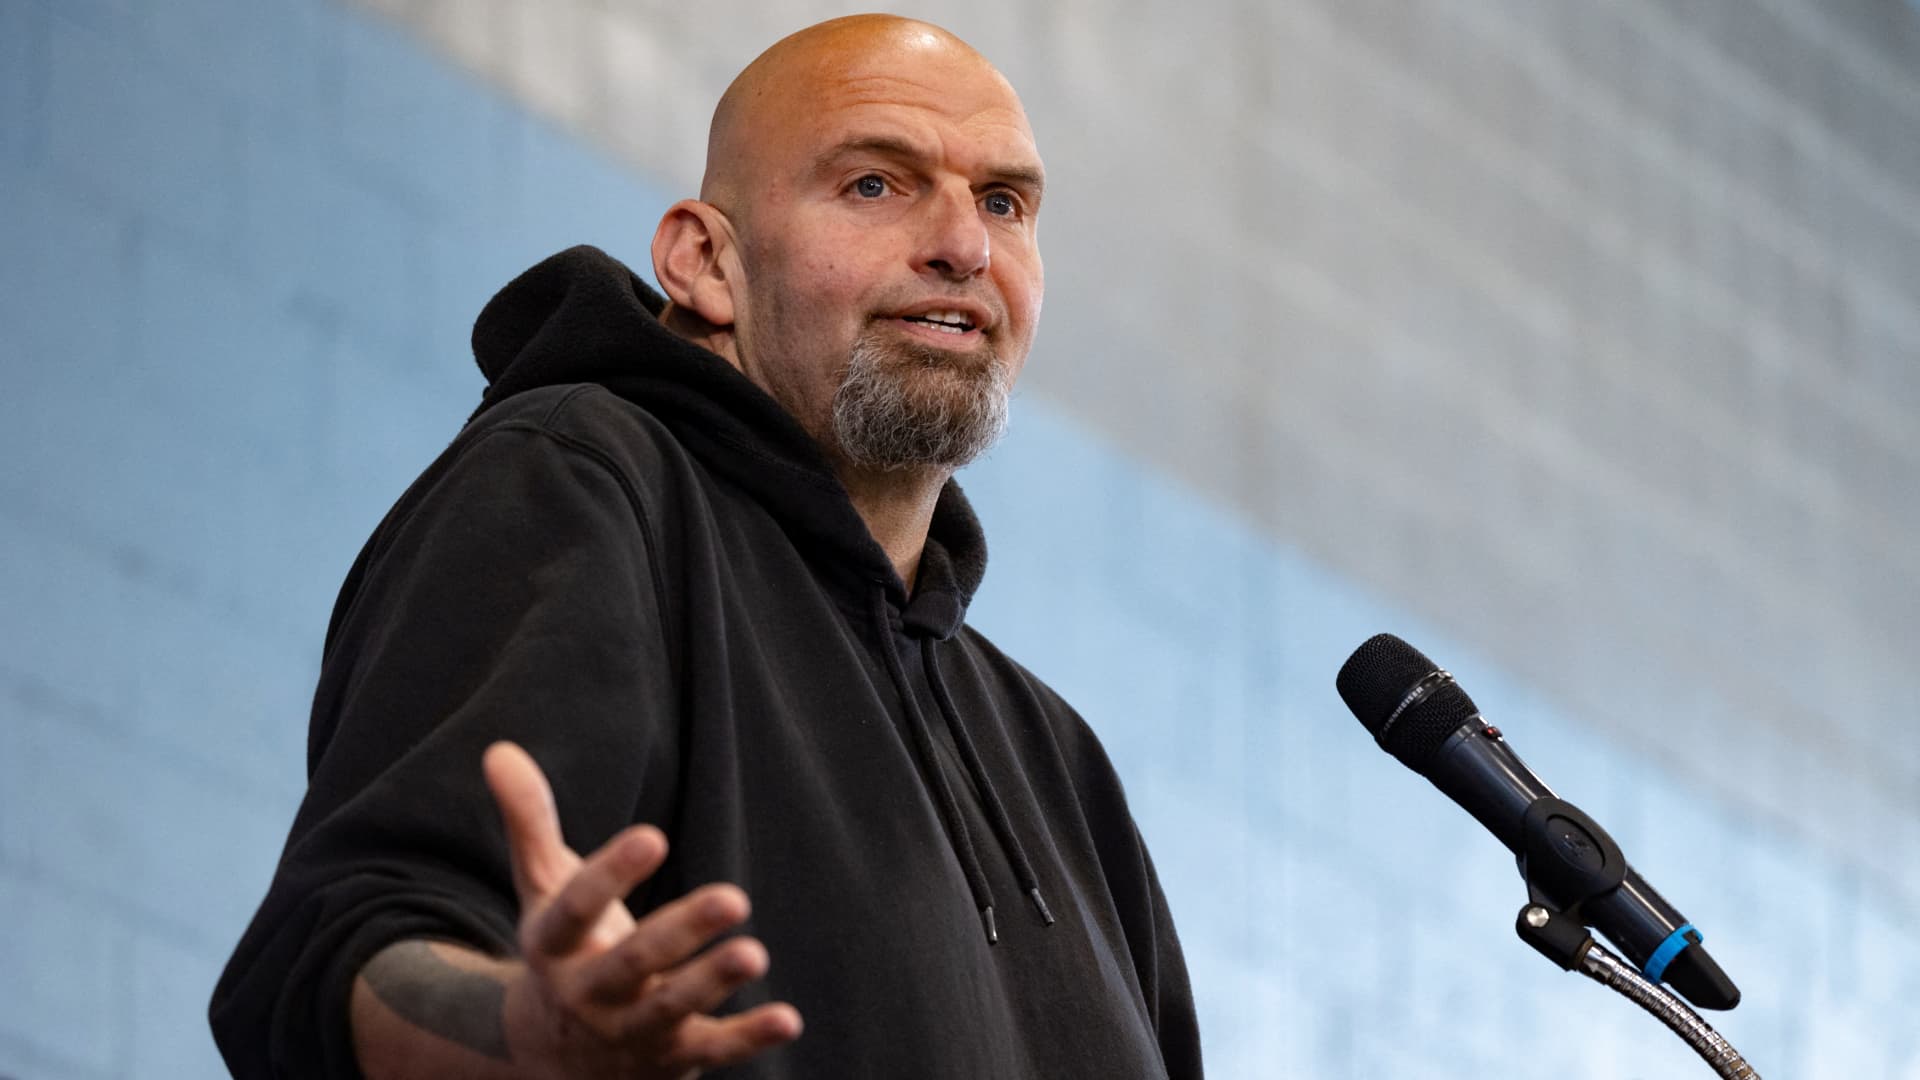 John Fetterman ‘has no work restrictions’ as he recovers from stroke, PA Senate hopeful’s doctor says